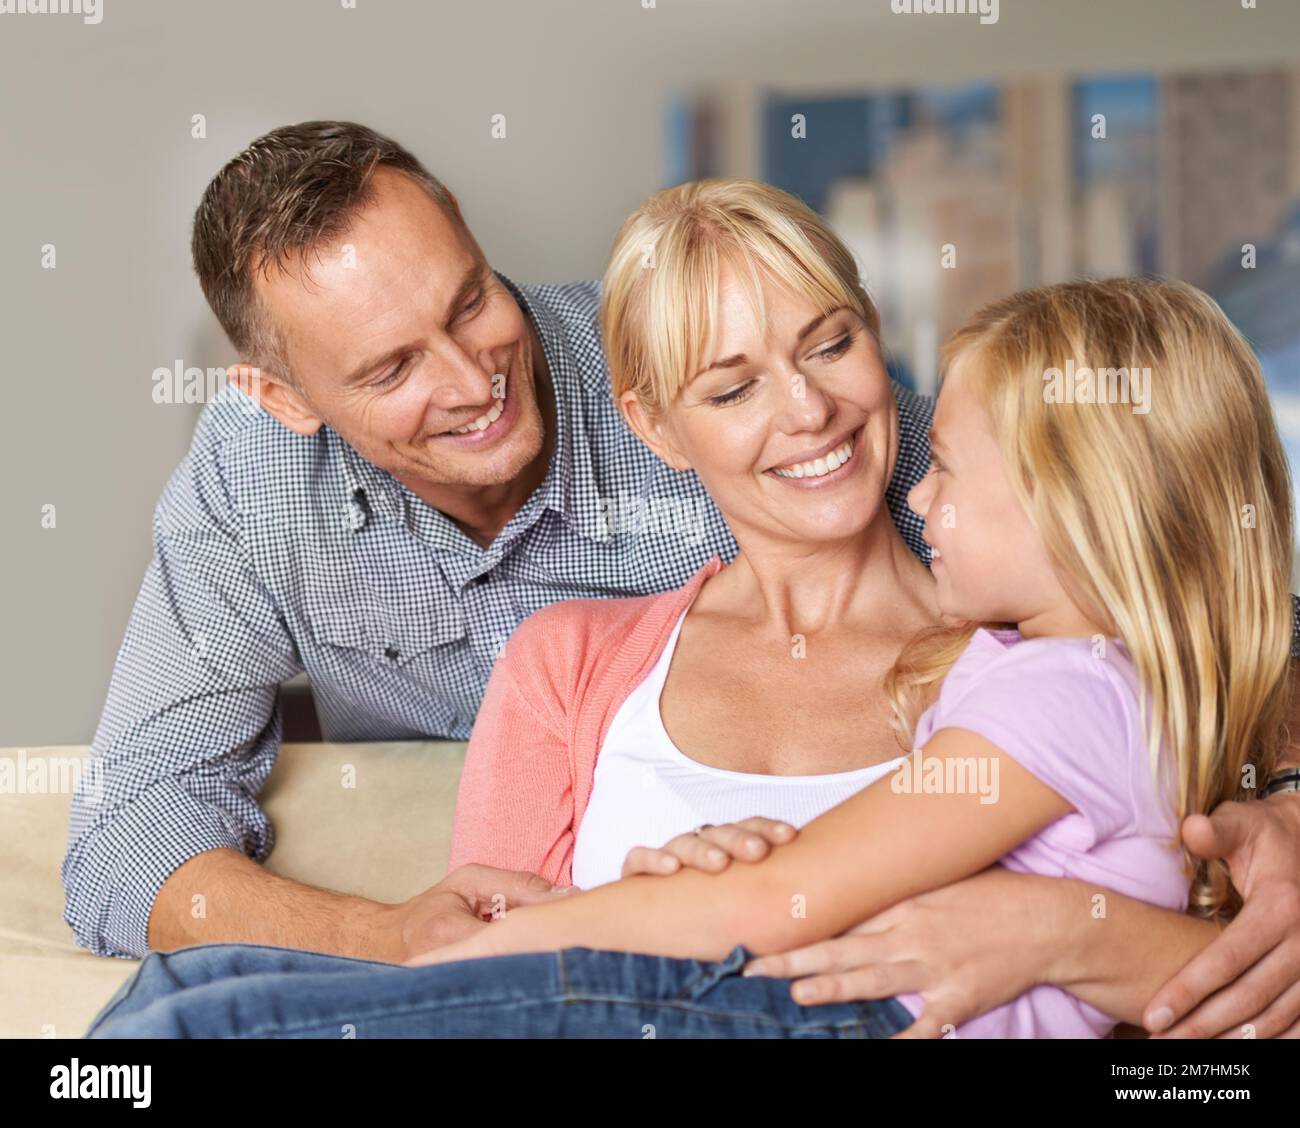 We make beautiful kids, dont we. a loving family embracing each other on the sofa. Stock Photo